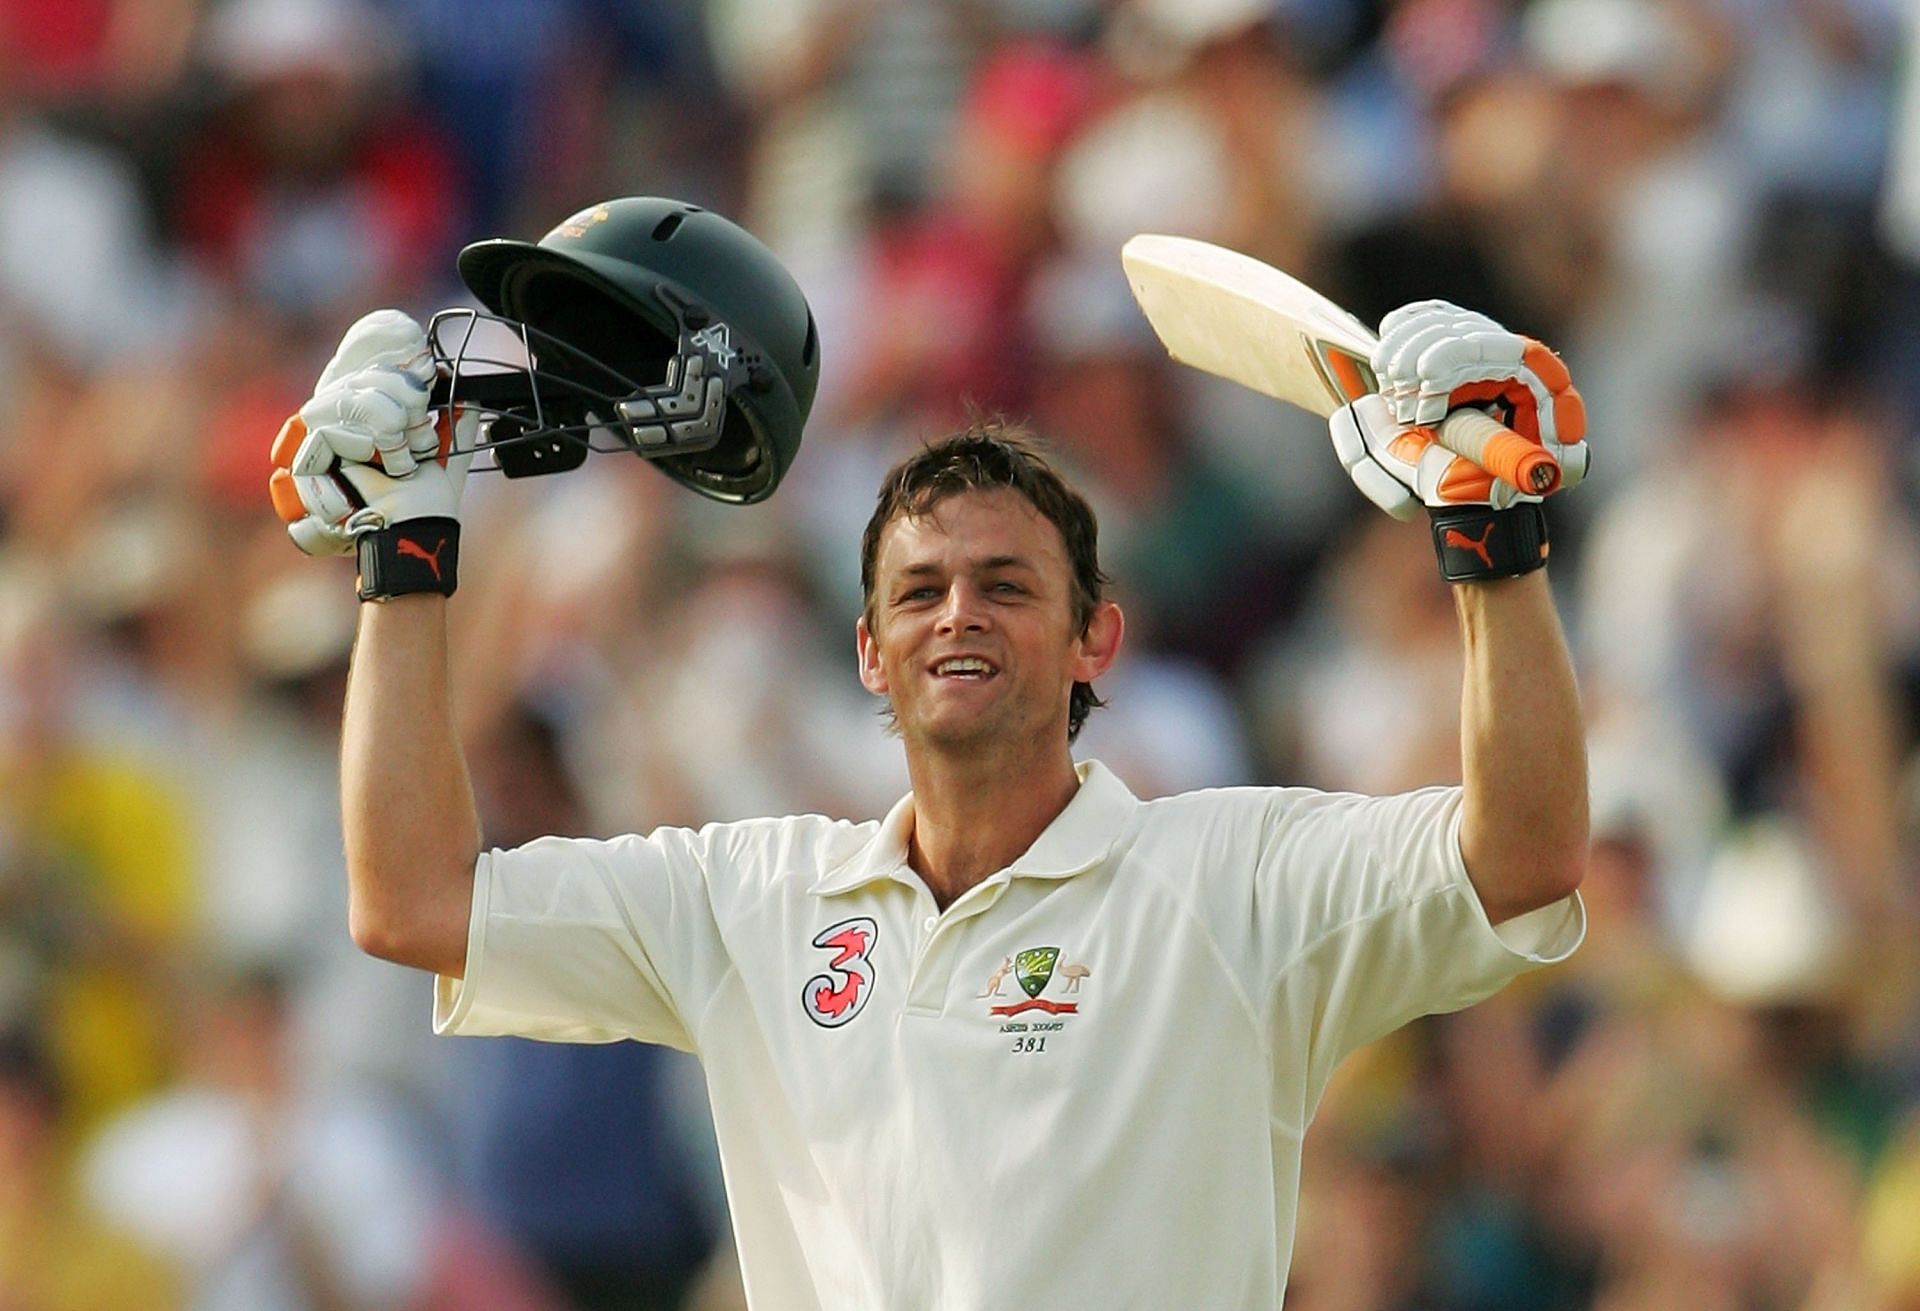 Gilchrist transformed the role of a wicket-keeper in a cricket team